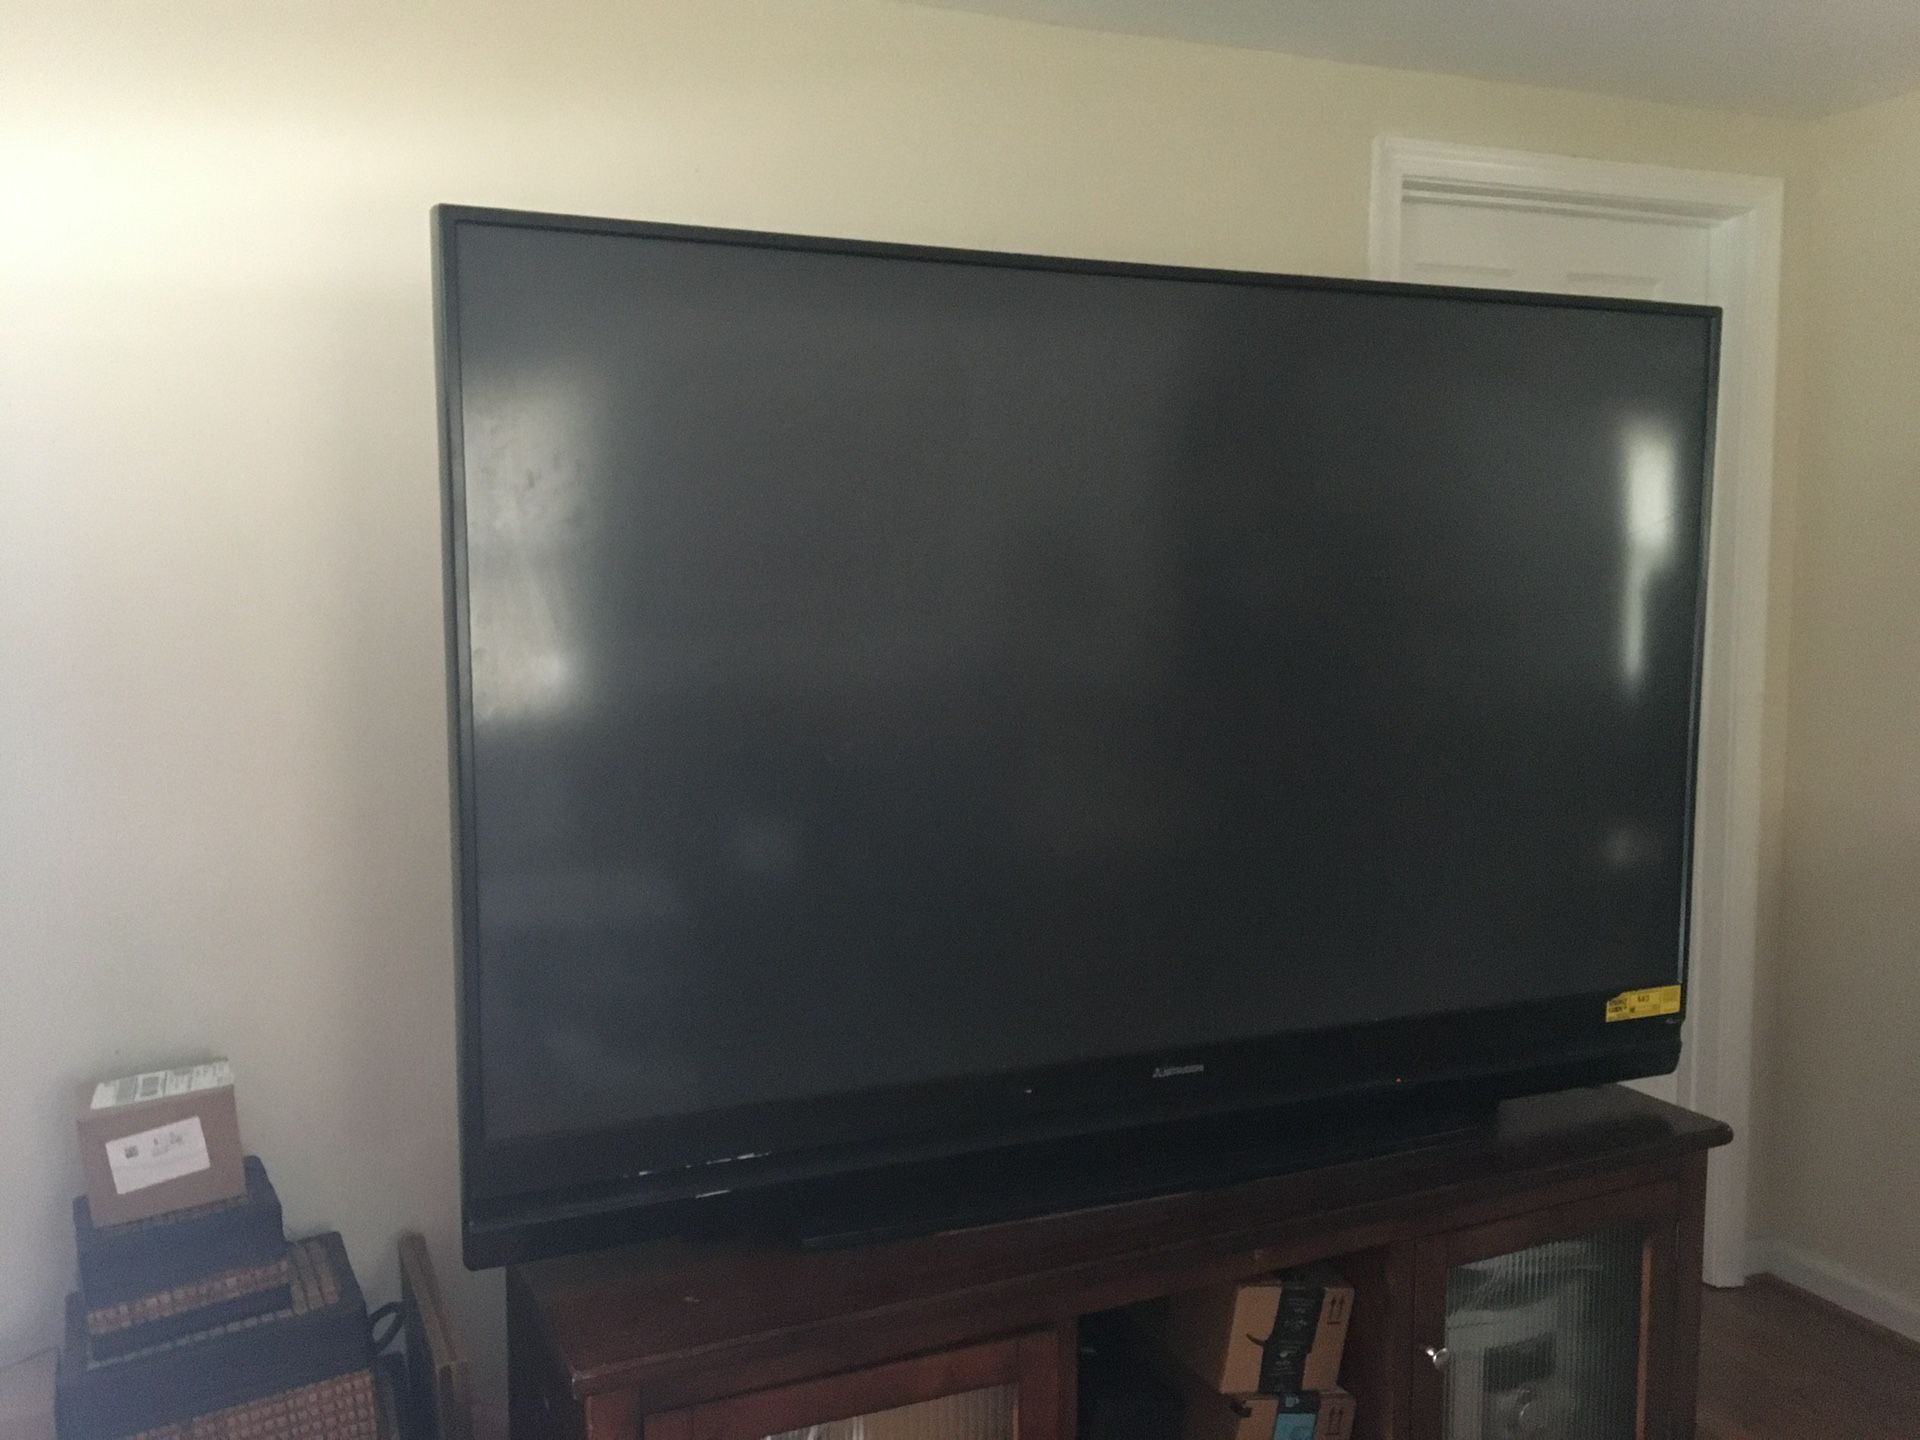 72 inch Mitsubishi TV- the Tv is available until marked sold.